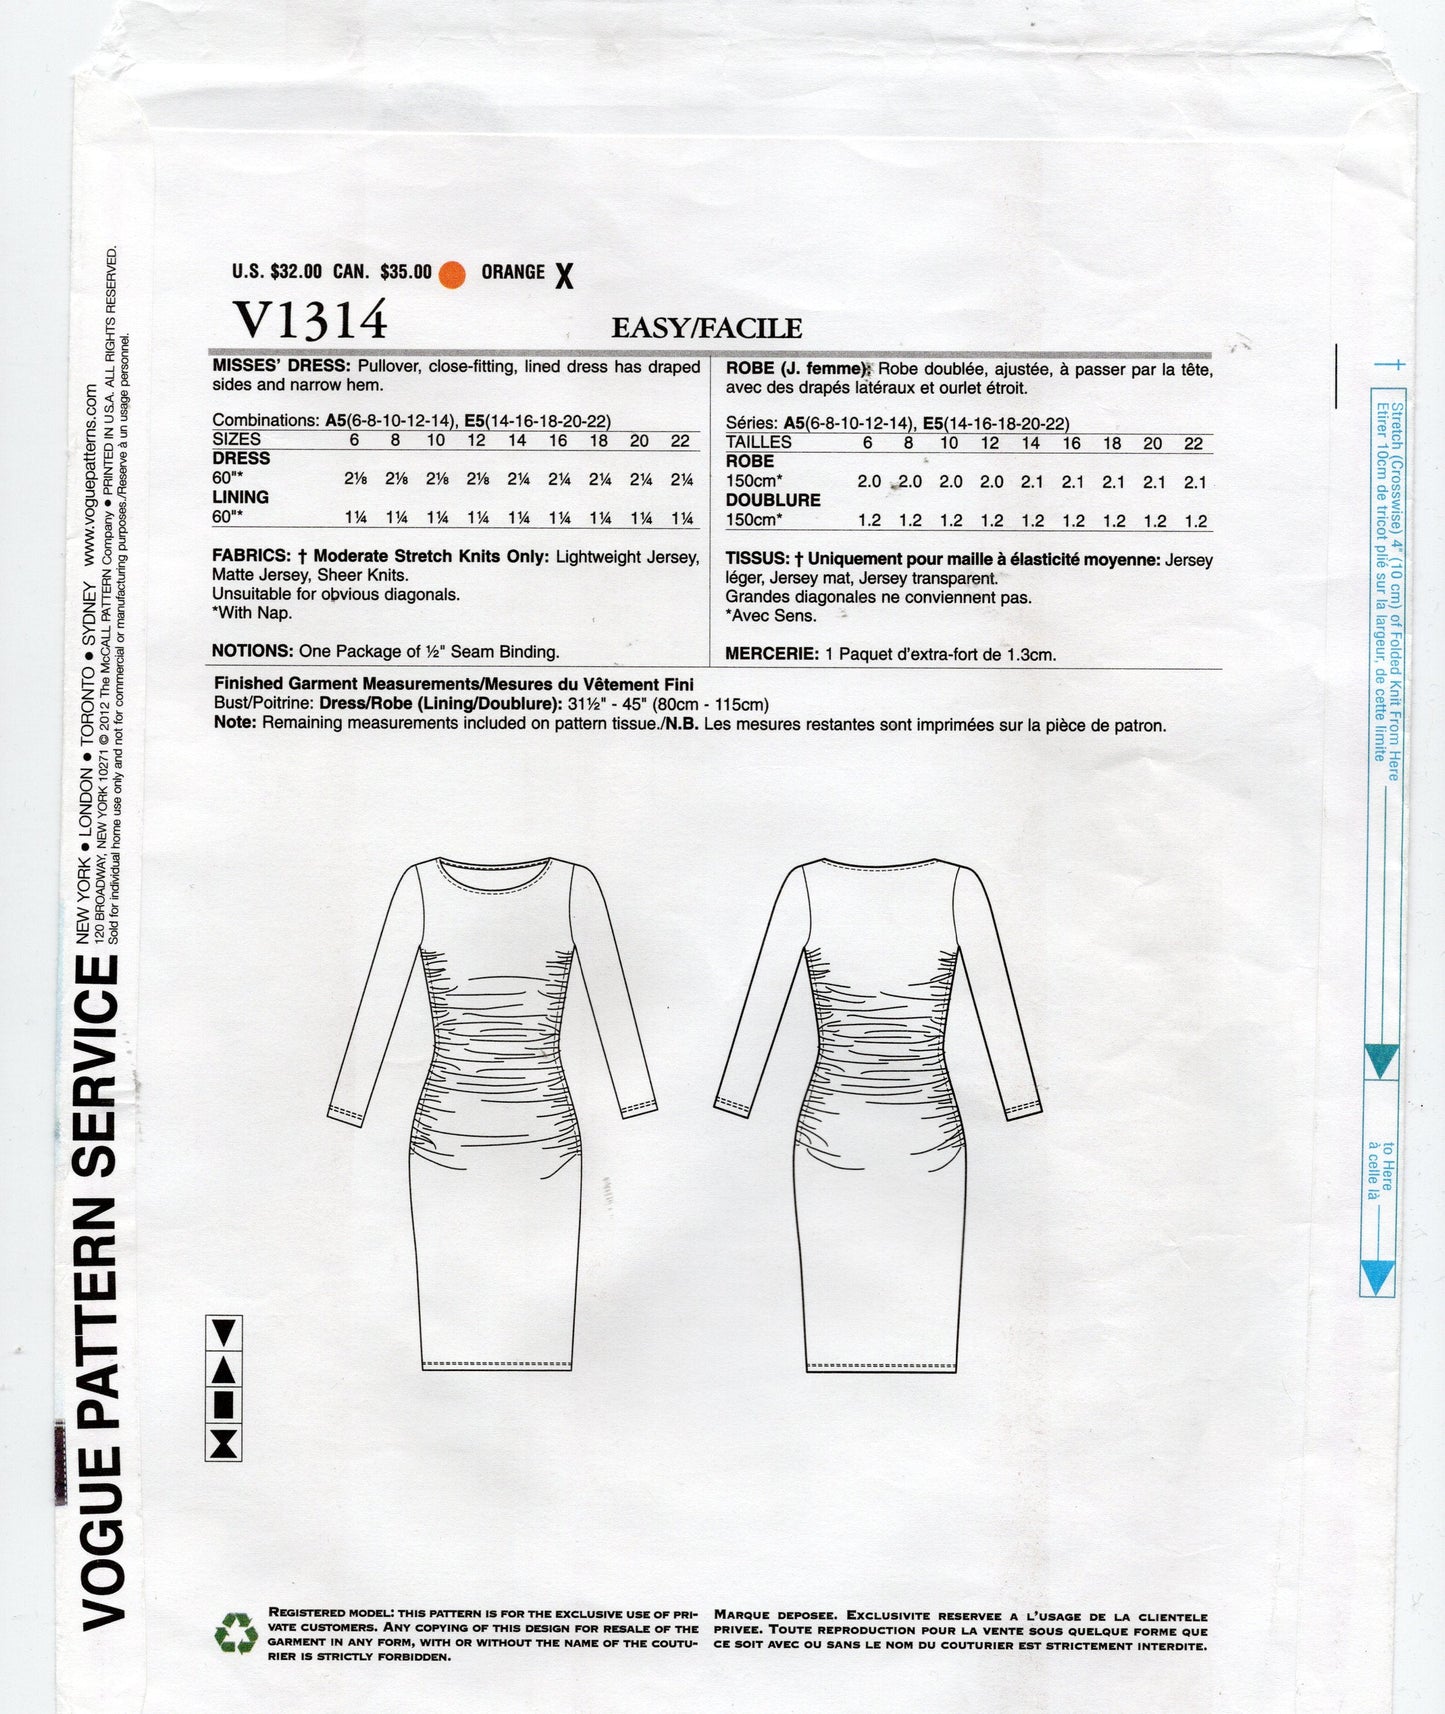 Vogue American Designer V1314 TRACY REESE Womens Stretch Ruched Pullover Evening Dress Out Of Print Sewing Pattern Size 14 - 22 UNCUT Factory Folded